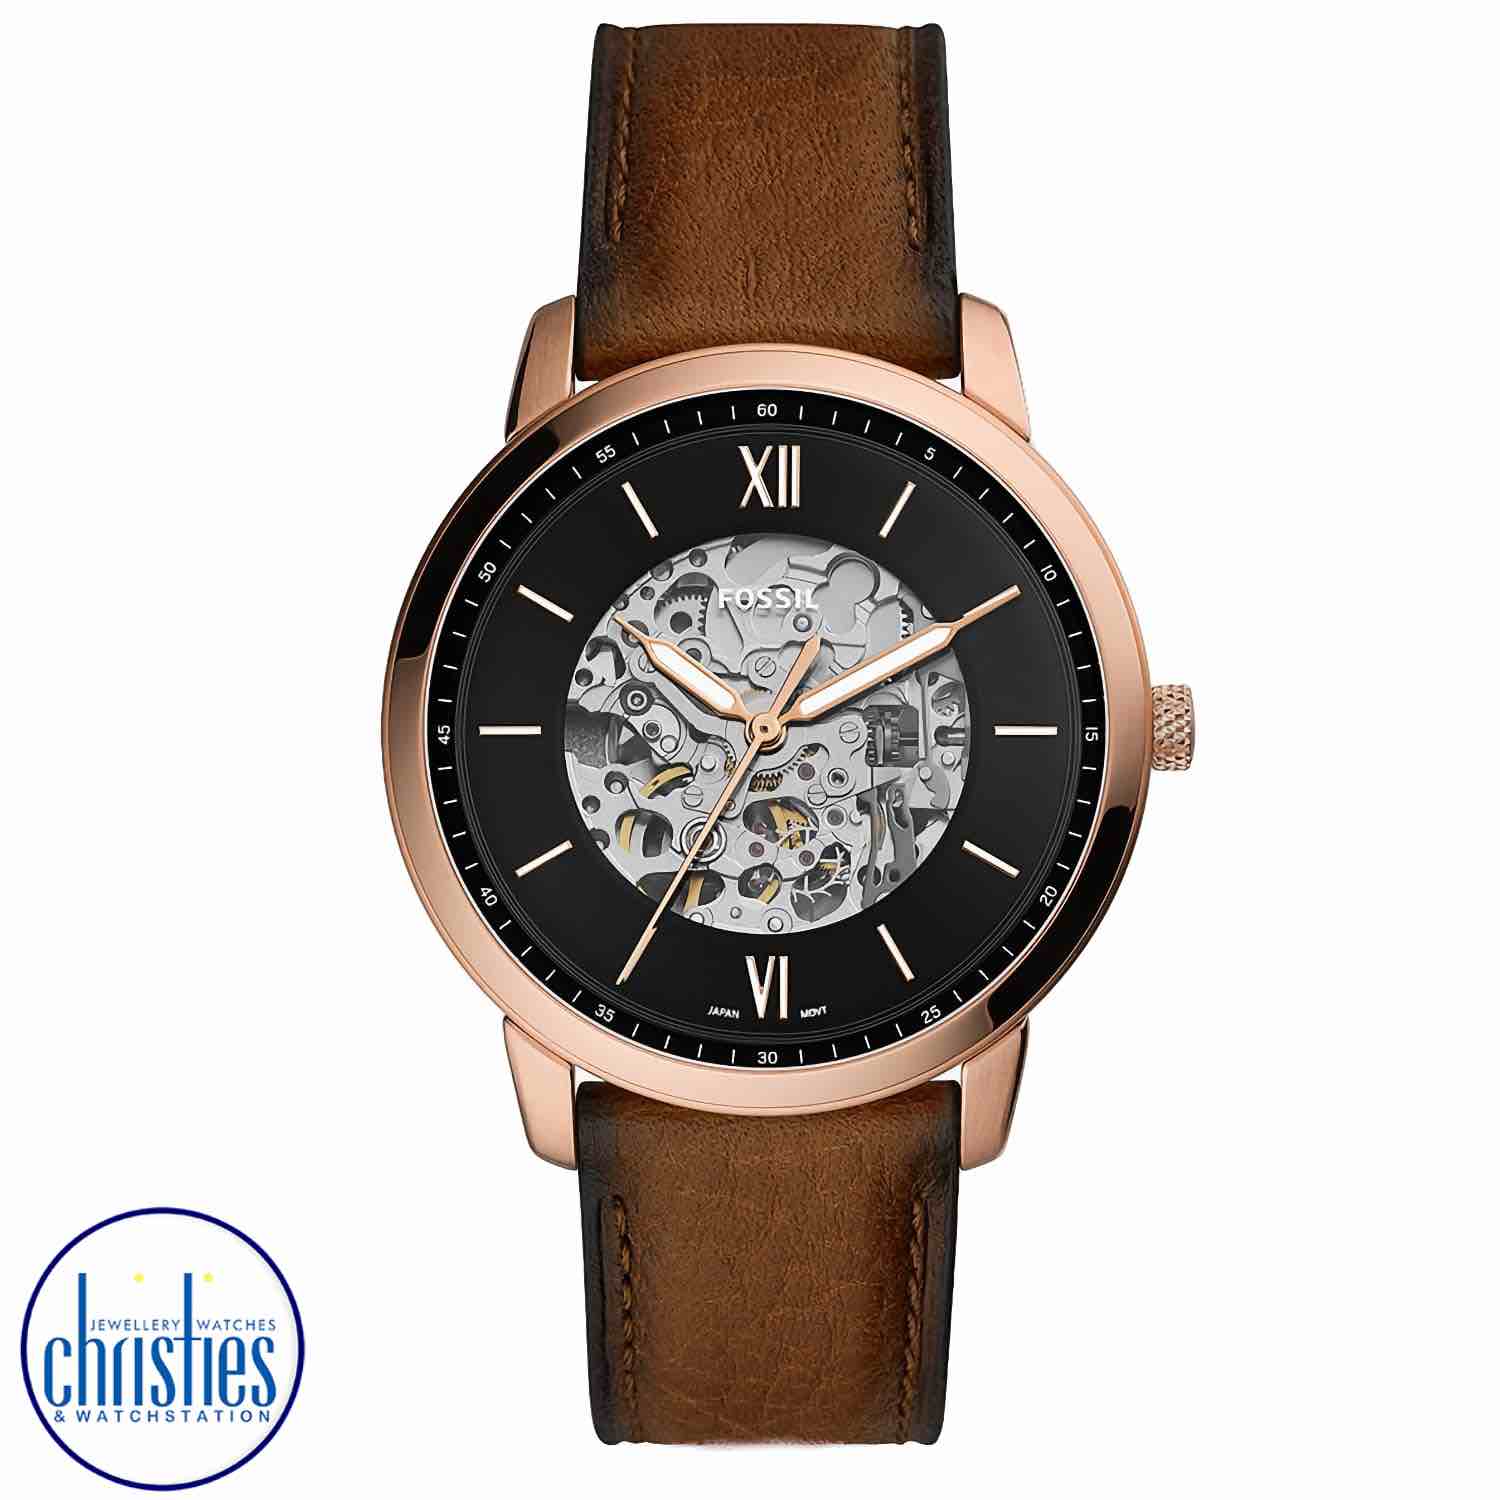 ME3195 Fossil Neutra Automatic Brown Eco Leather Watch. ME3195 Fossil Neutra Automatic Brown Eco Leather WatchAfterpay - Split your purchase into 4 instalments - Pay for your purchase over 4 instalments, due every two weeks.